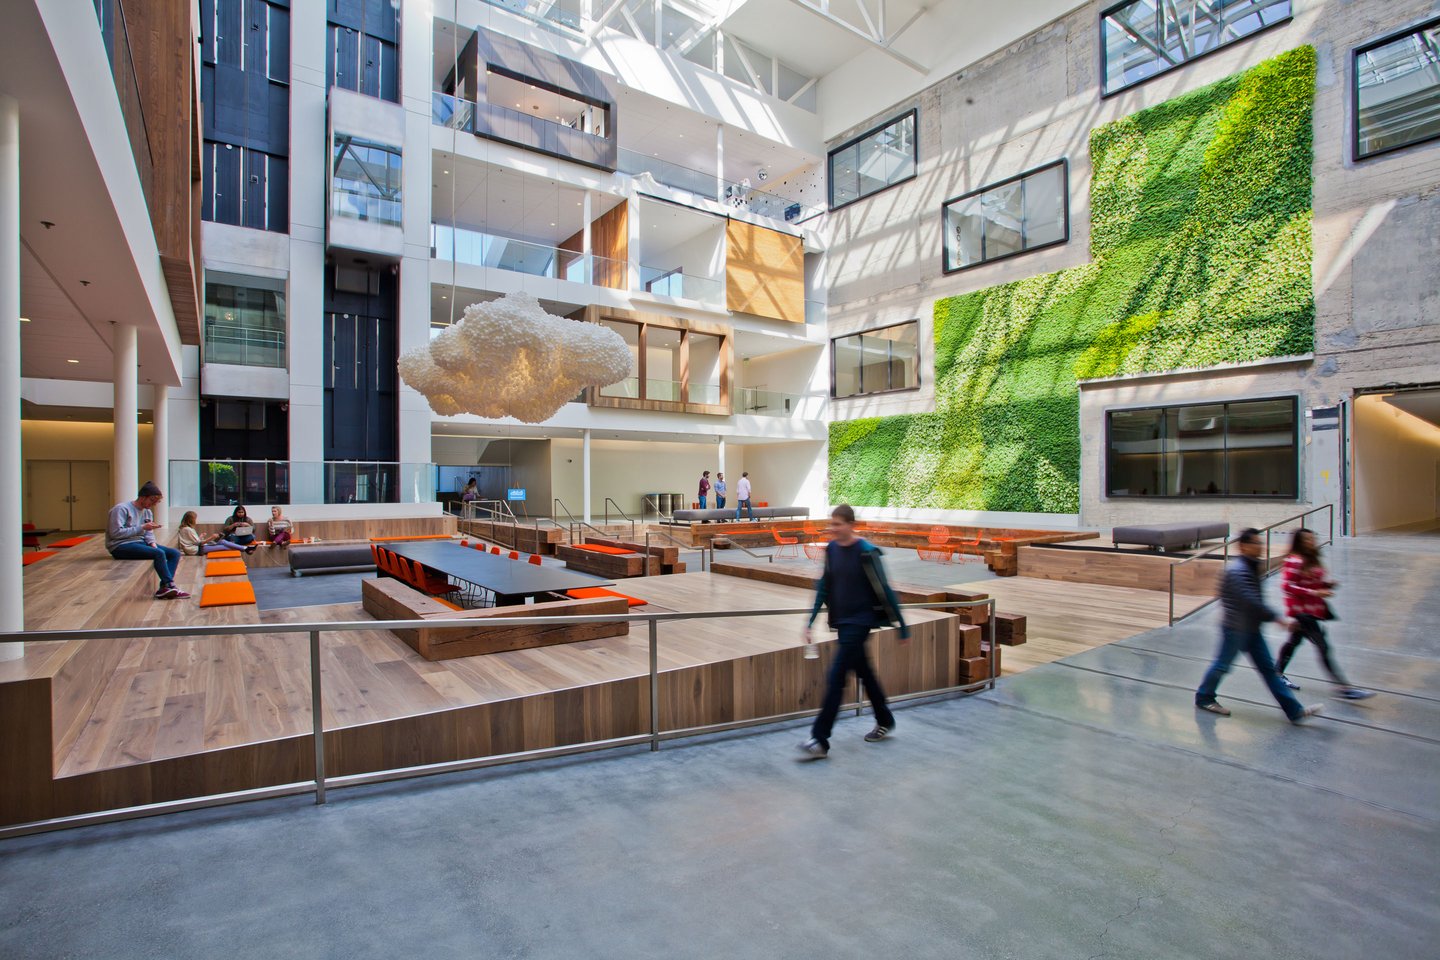 Airbnb’s innovative HQ in San Francisco